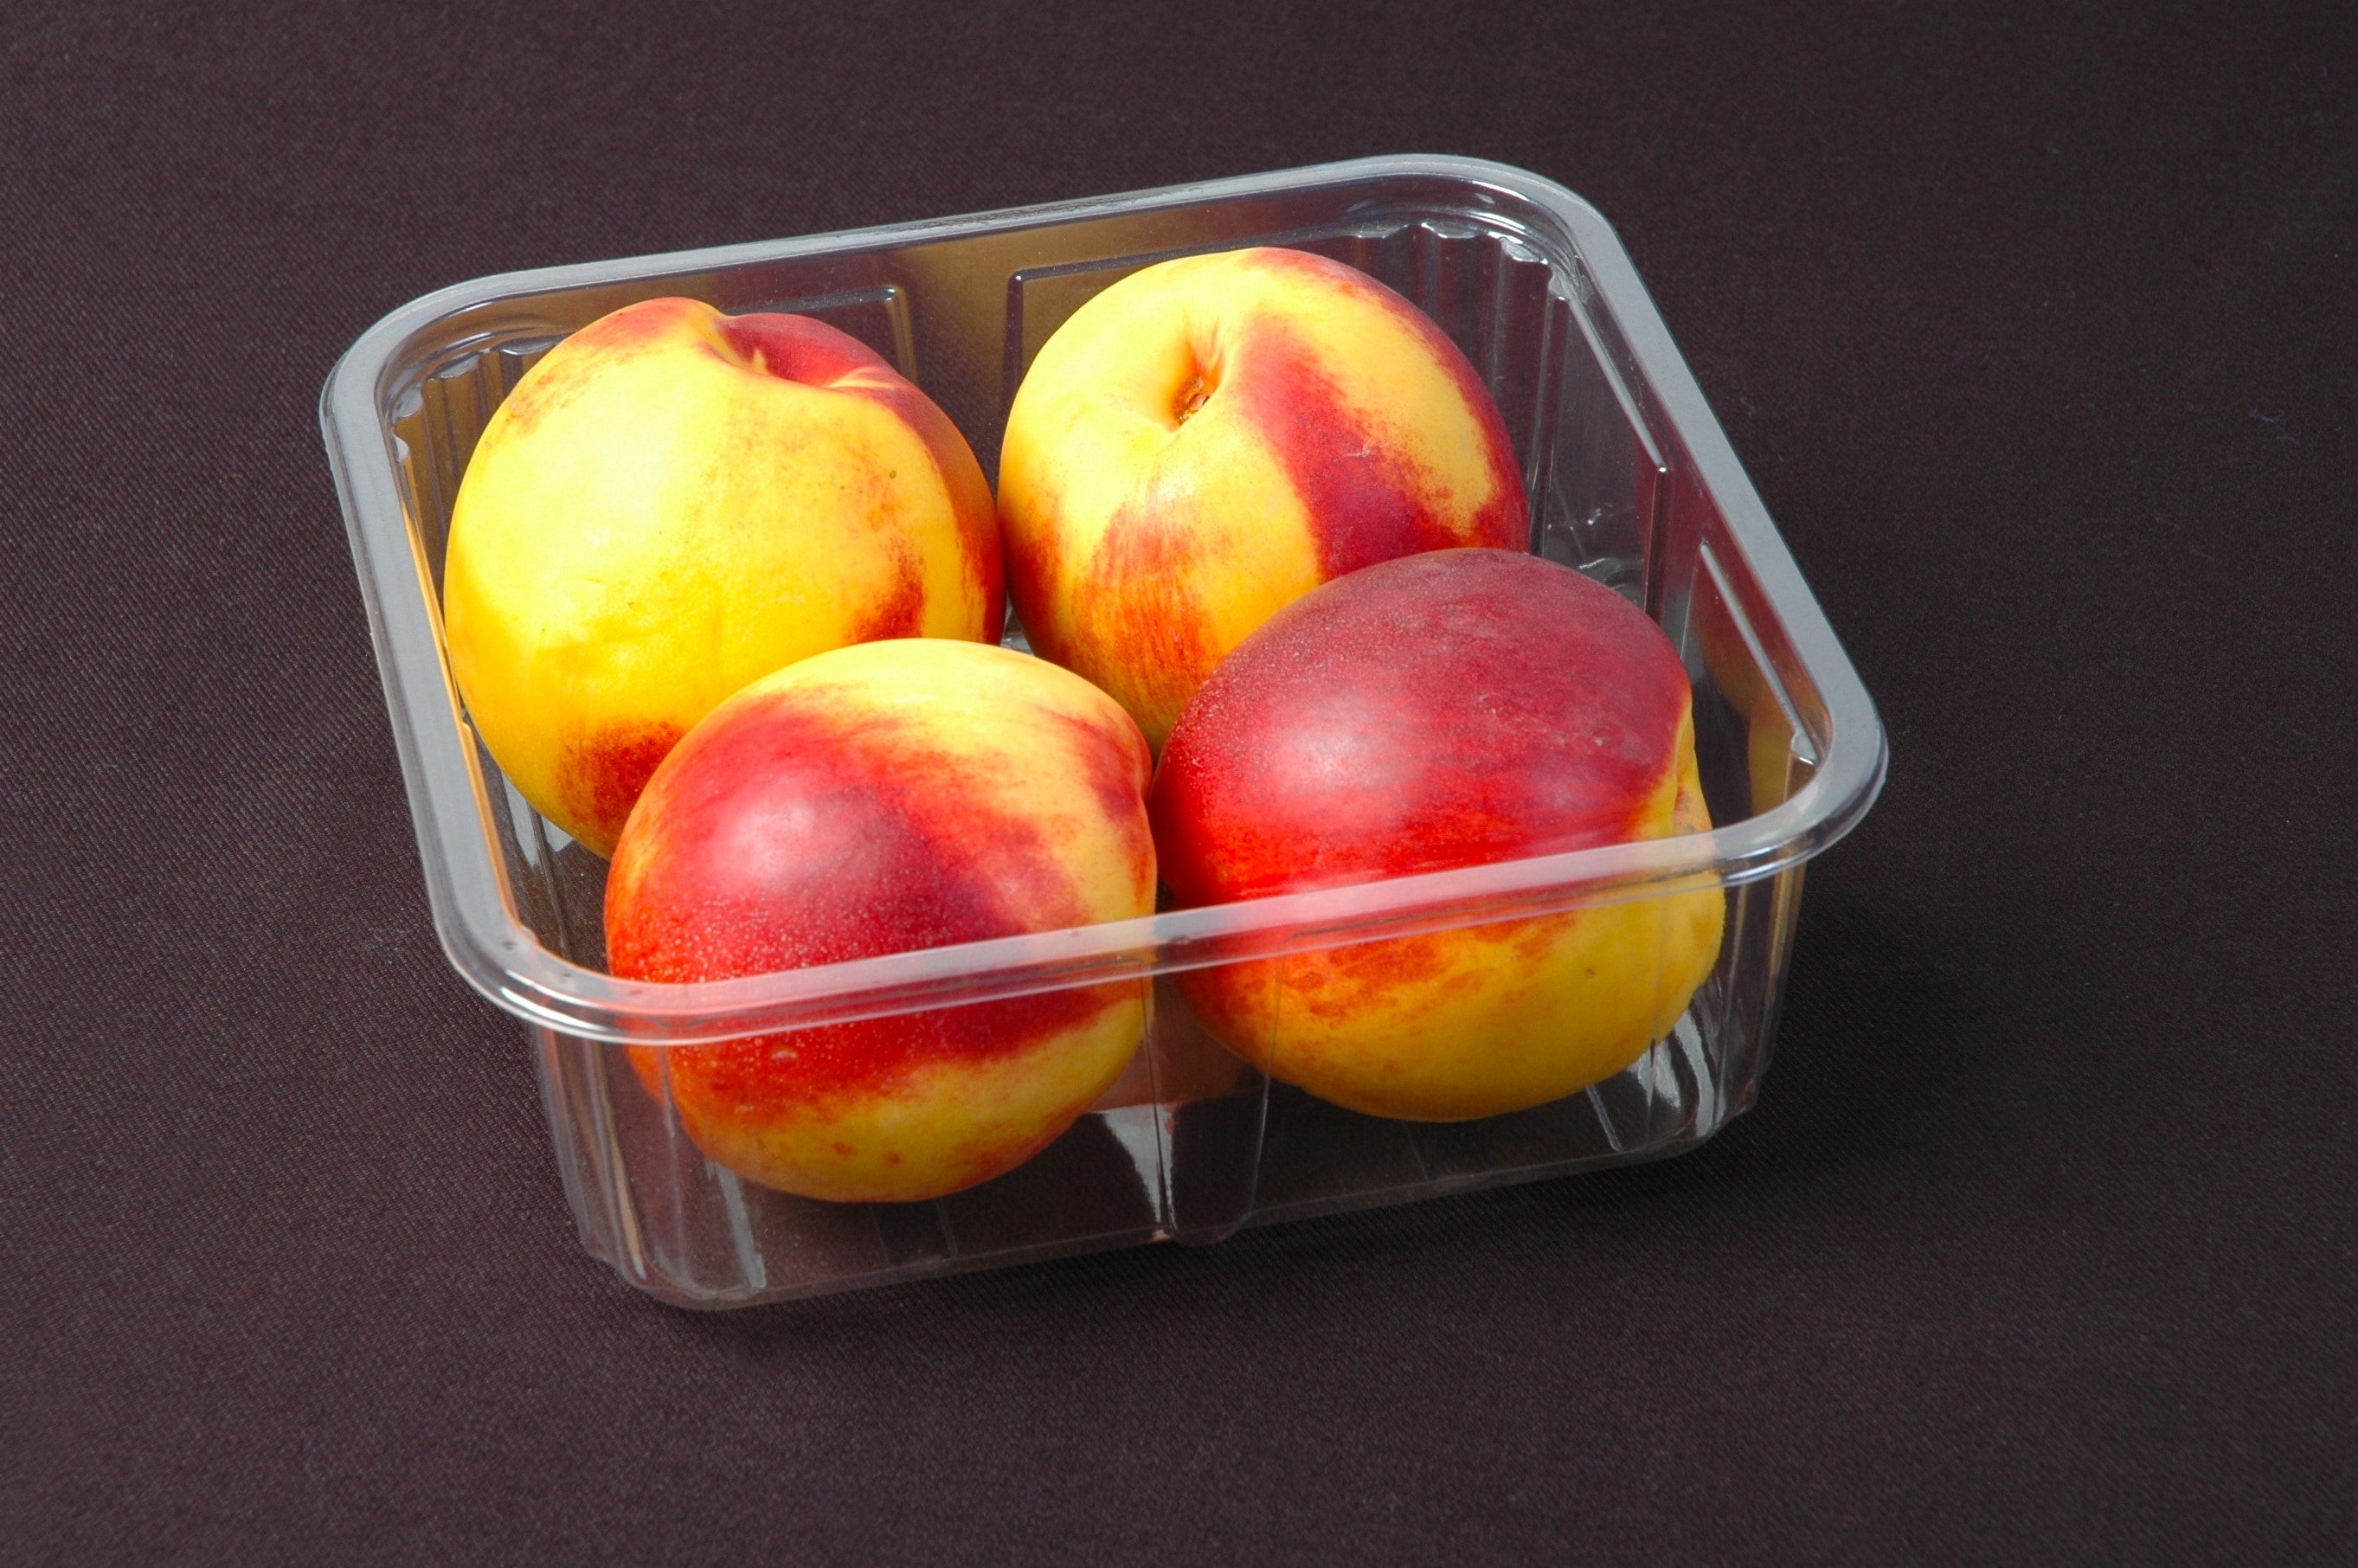 Download Four Red And Yellow Apples On Plastic Container Free Image Peakpx PSD Mockup Templates